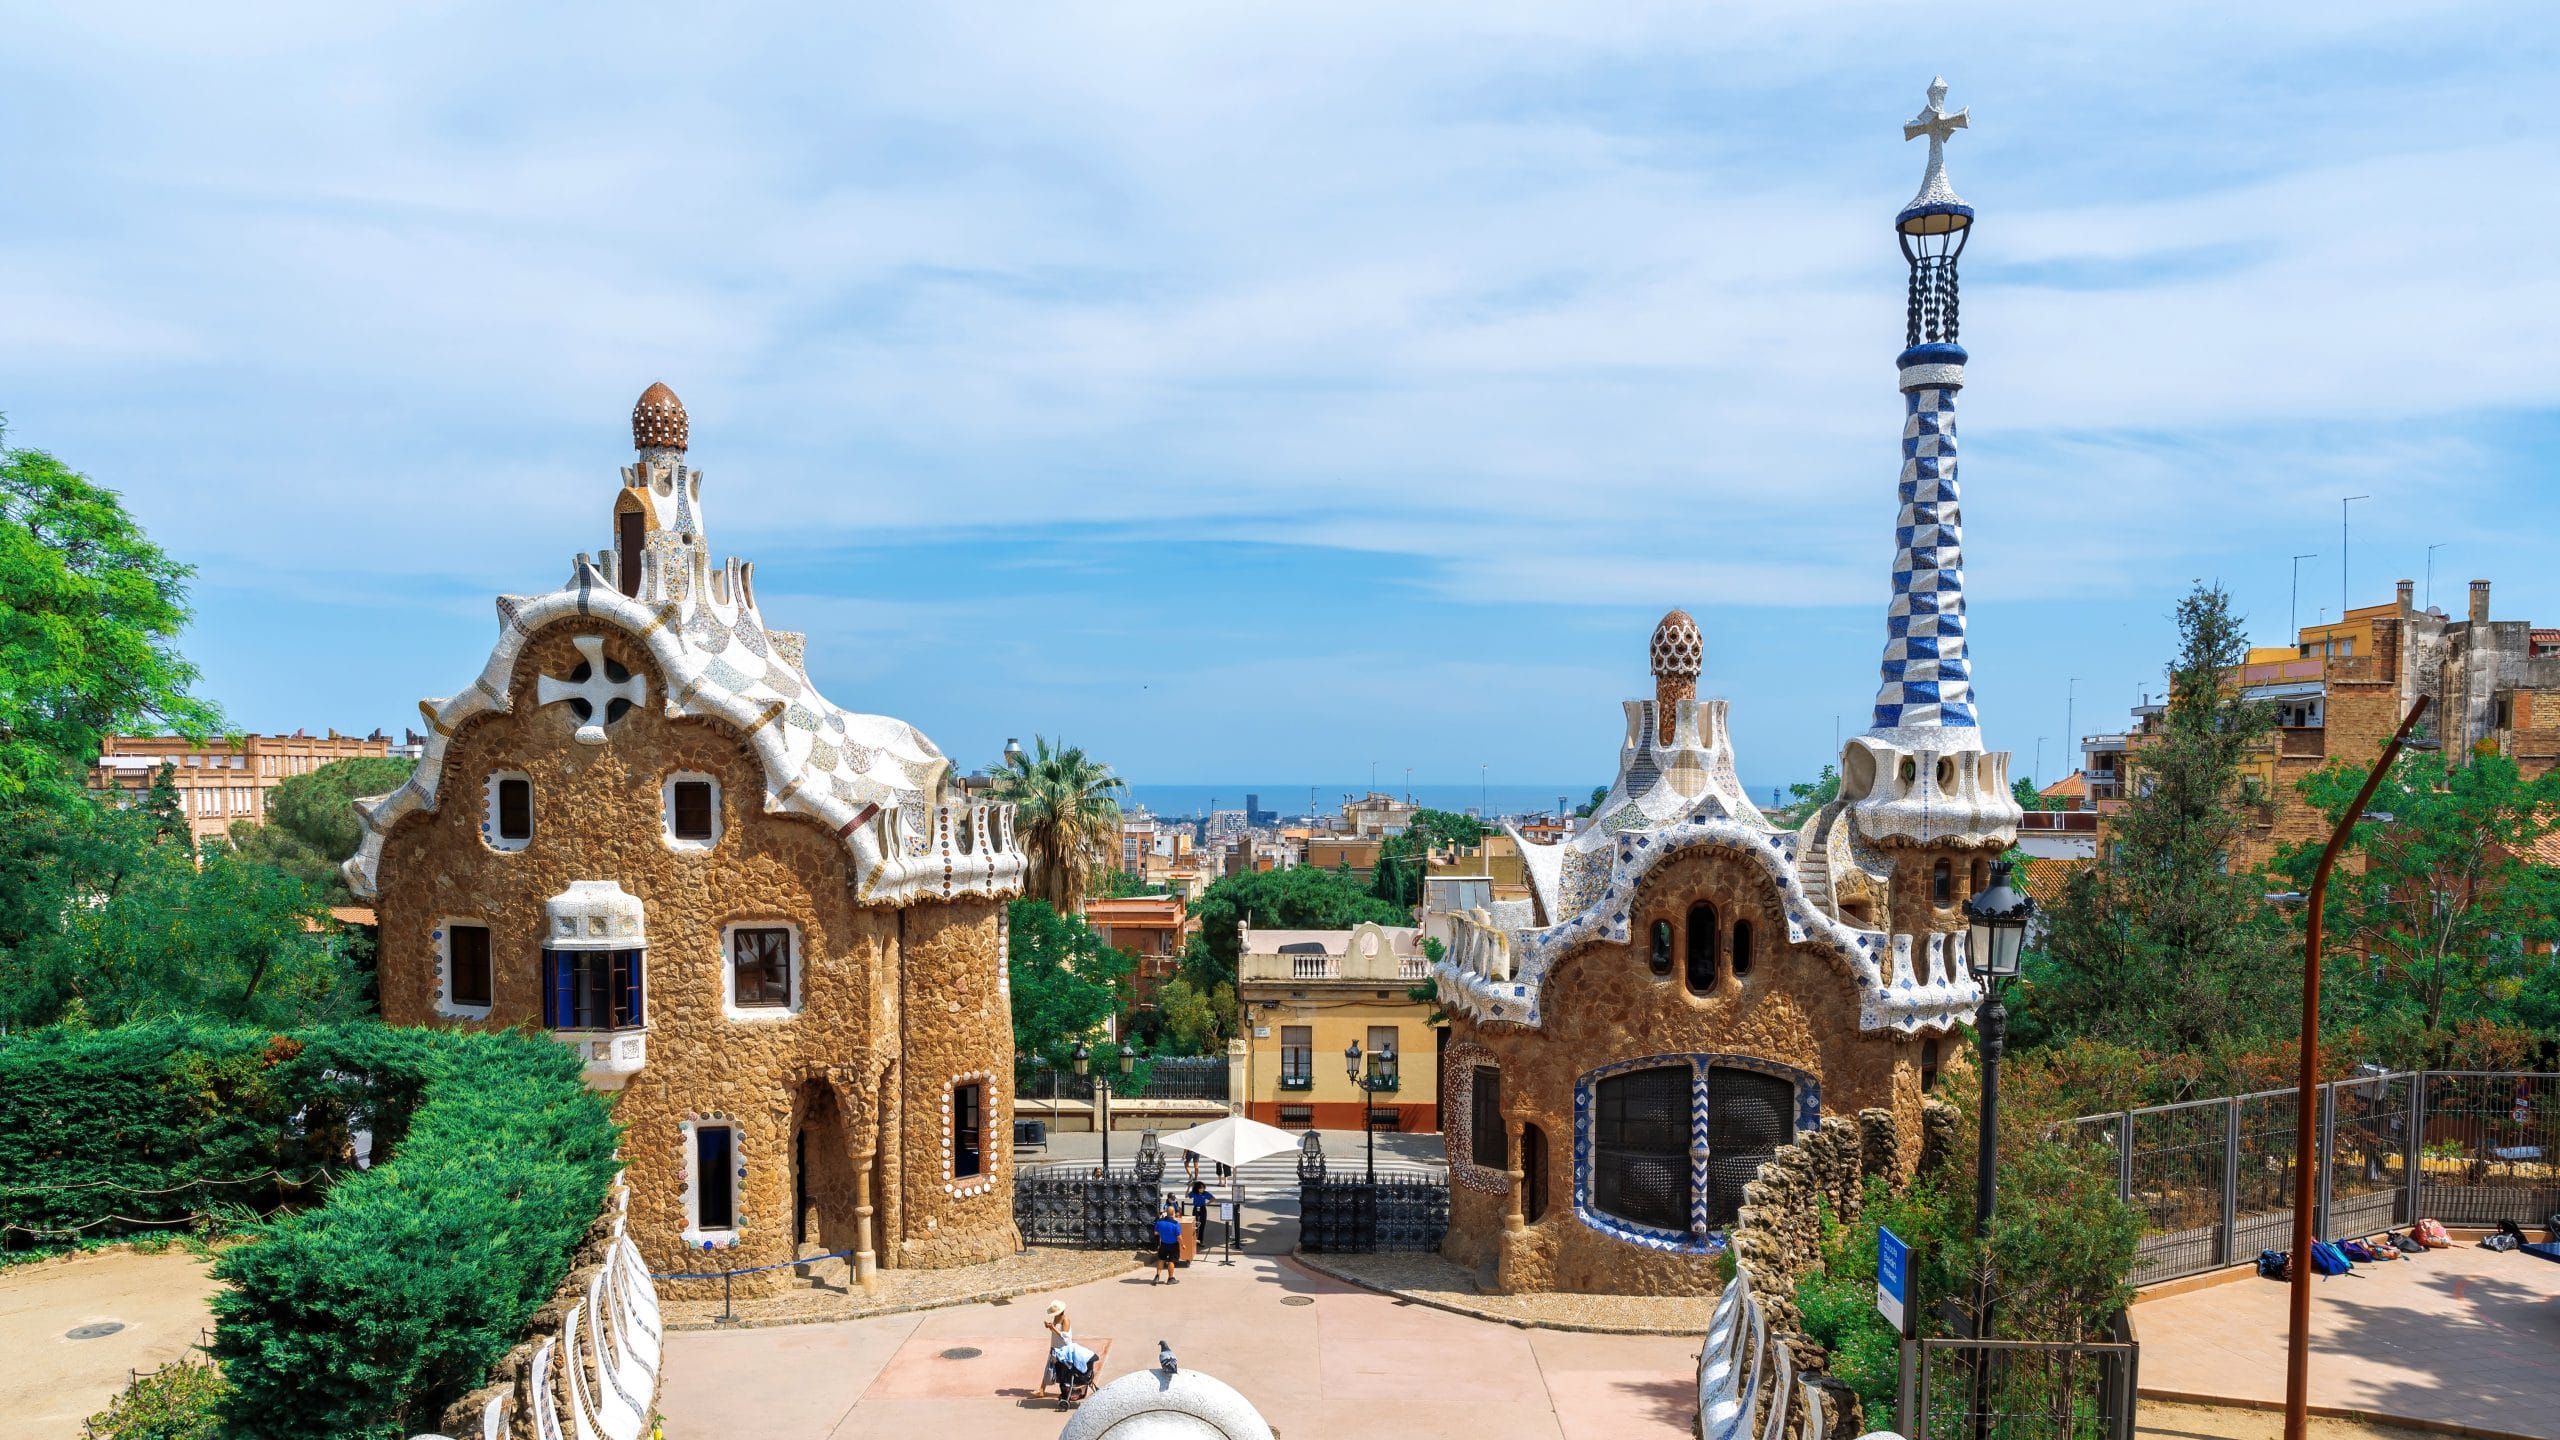 BARCELONA, SPAIN - JUNE 12, 2021: Parc Guel, buildings with unusual architectural style, cityscape on the background